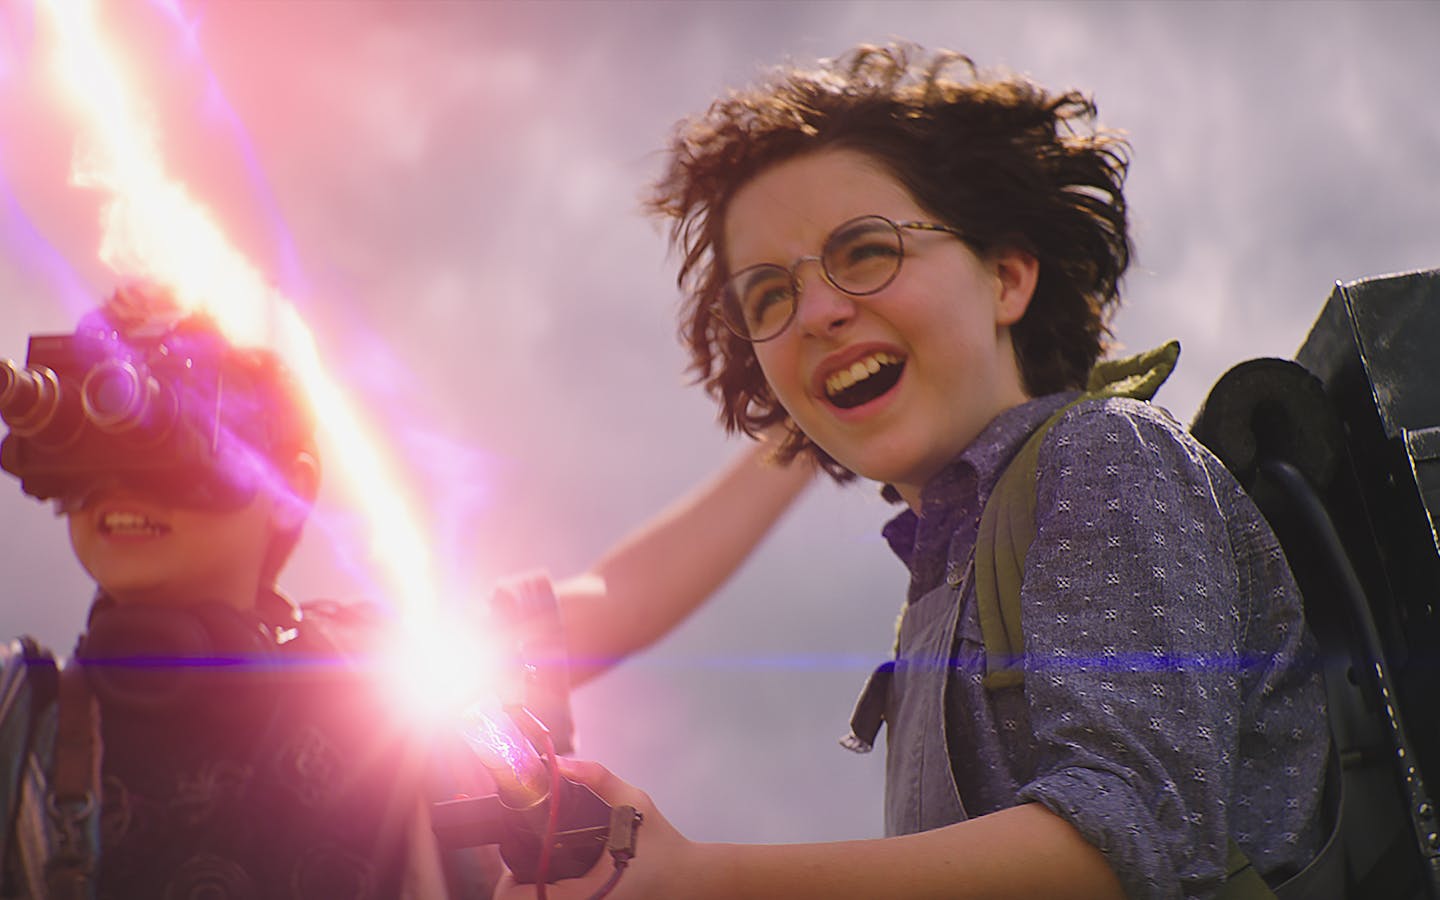 A New Ghostbusters Film Is On The Way - Age of The Nerd